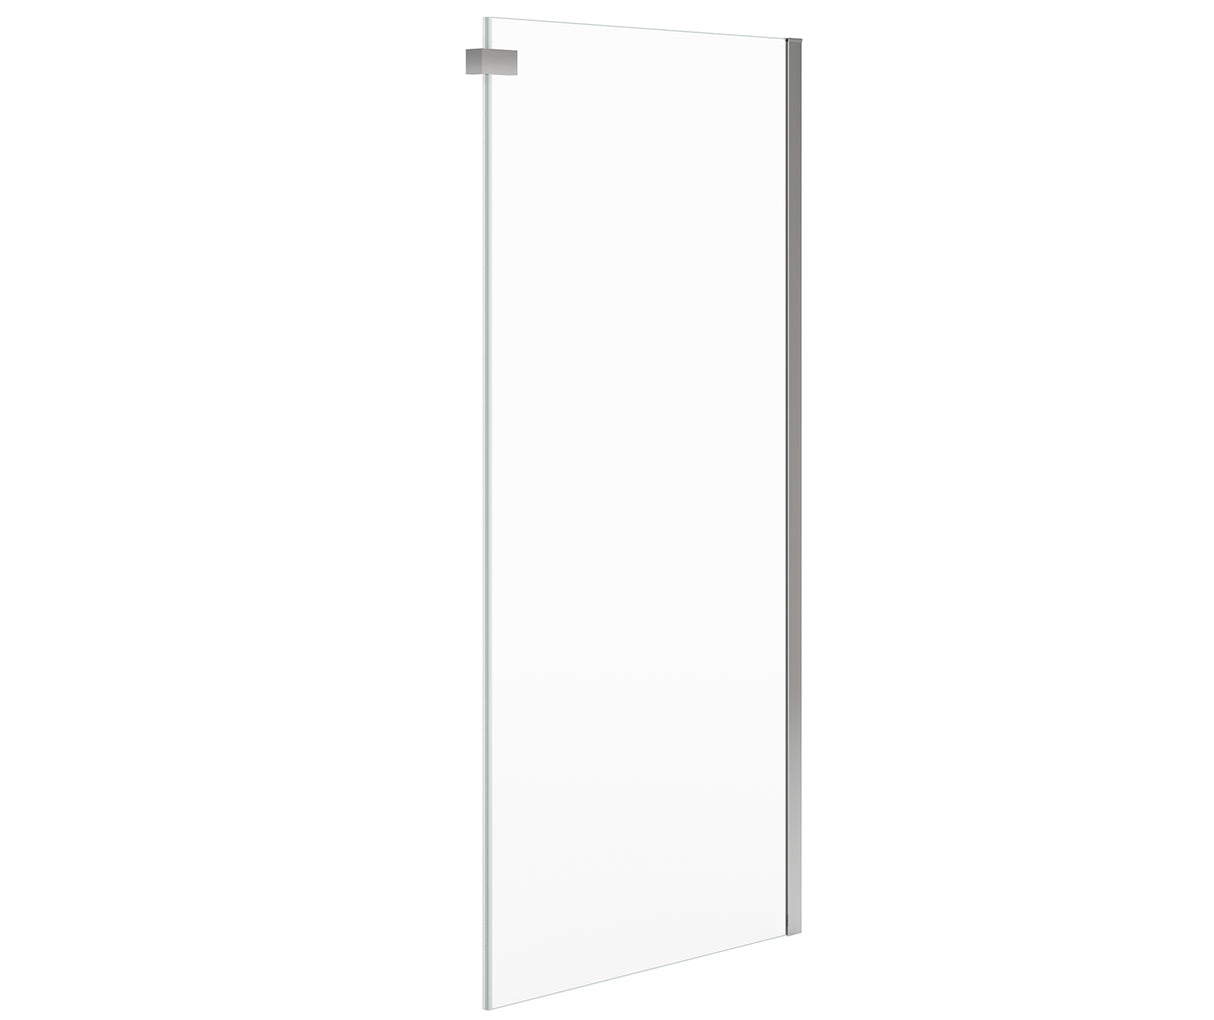 MAAX 134953-900-084-000 Halo Pro 60 x 32 x 78 3/4 in. 8mm Sliding Shower Door with Towel Bar for Corner Installation with Clear glass in Chrome